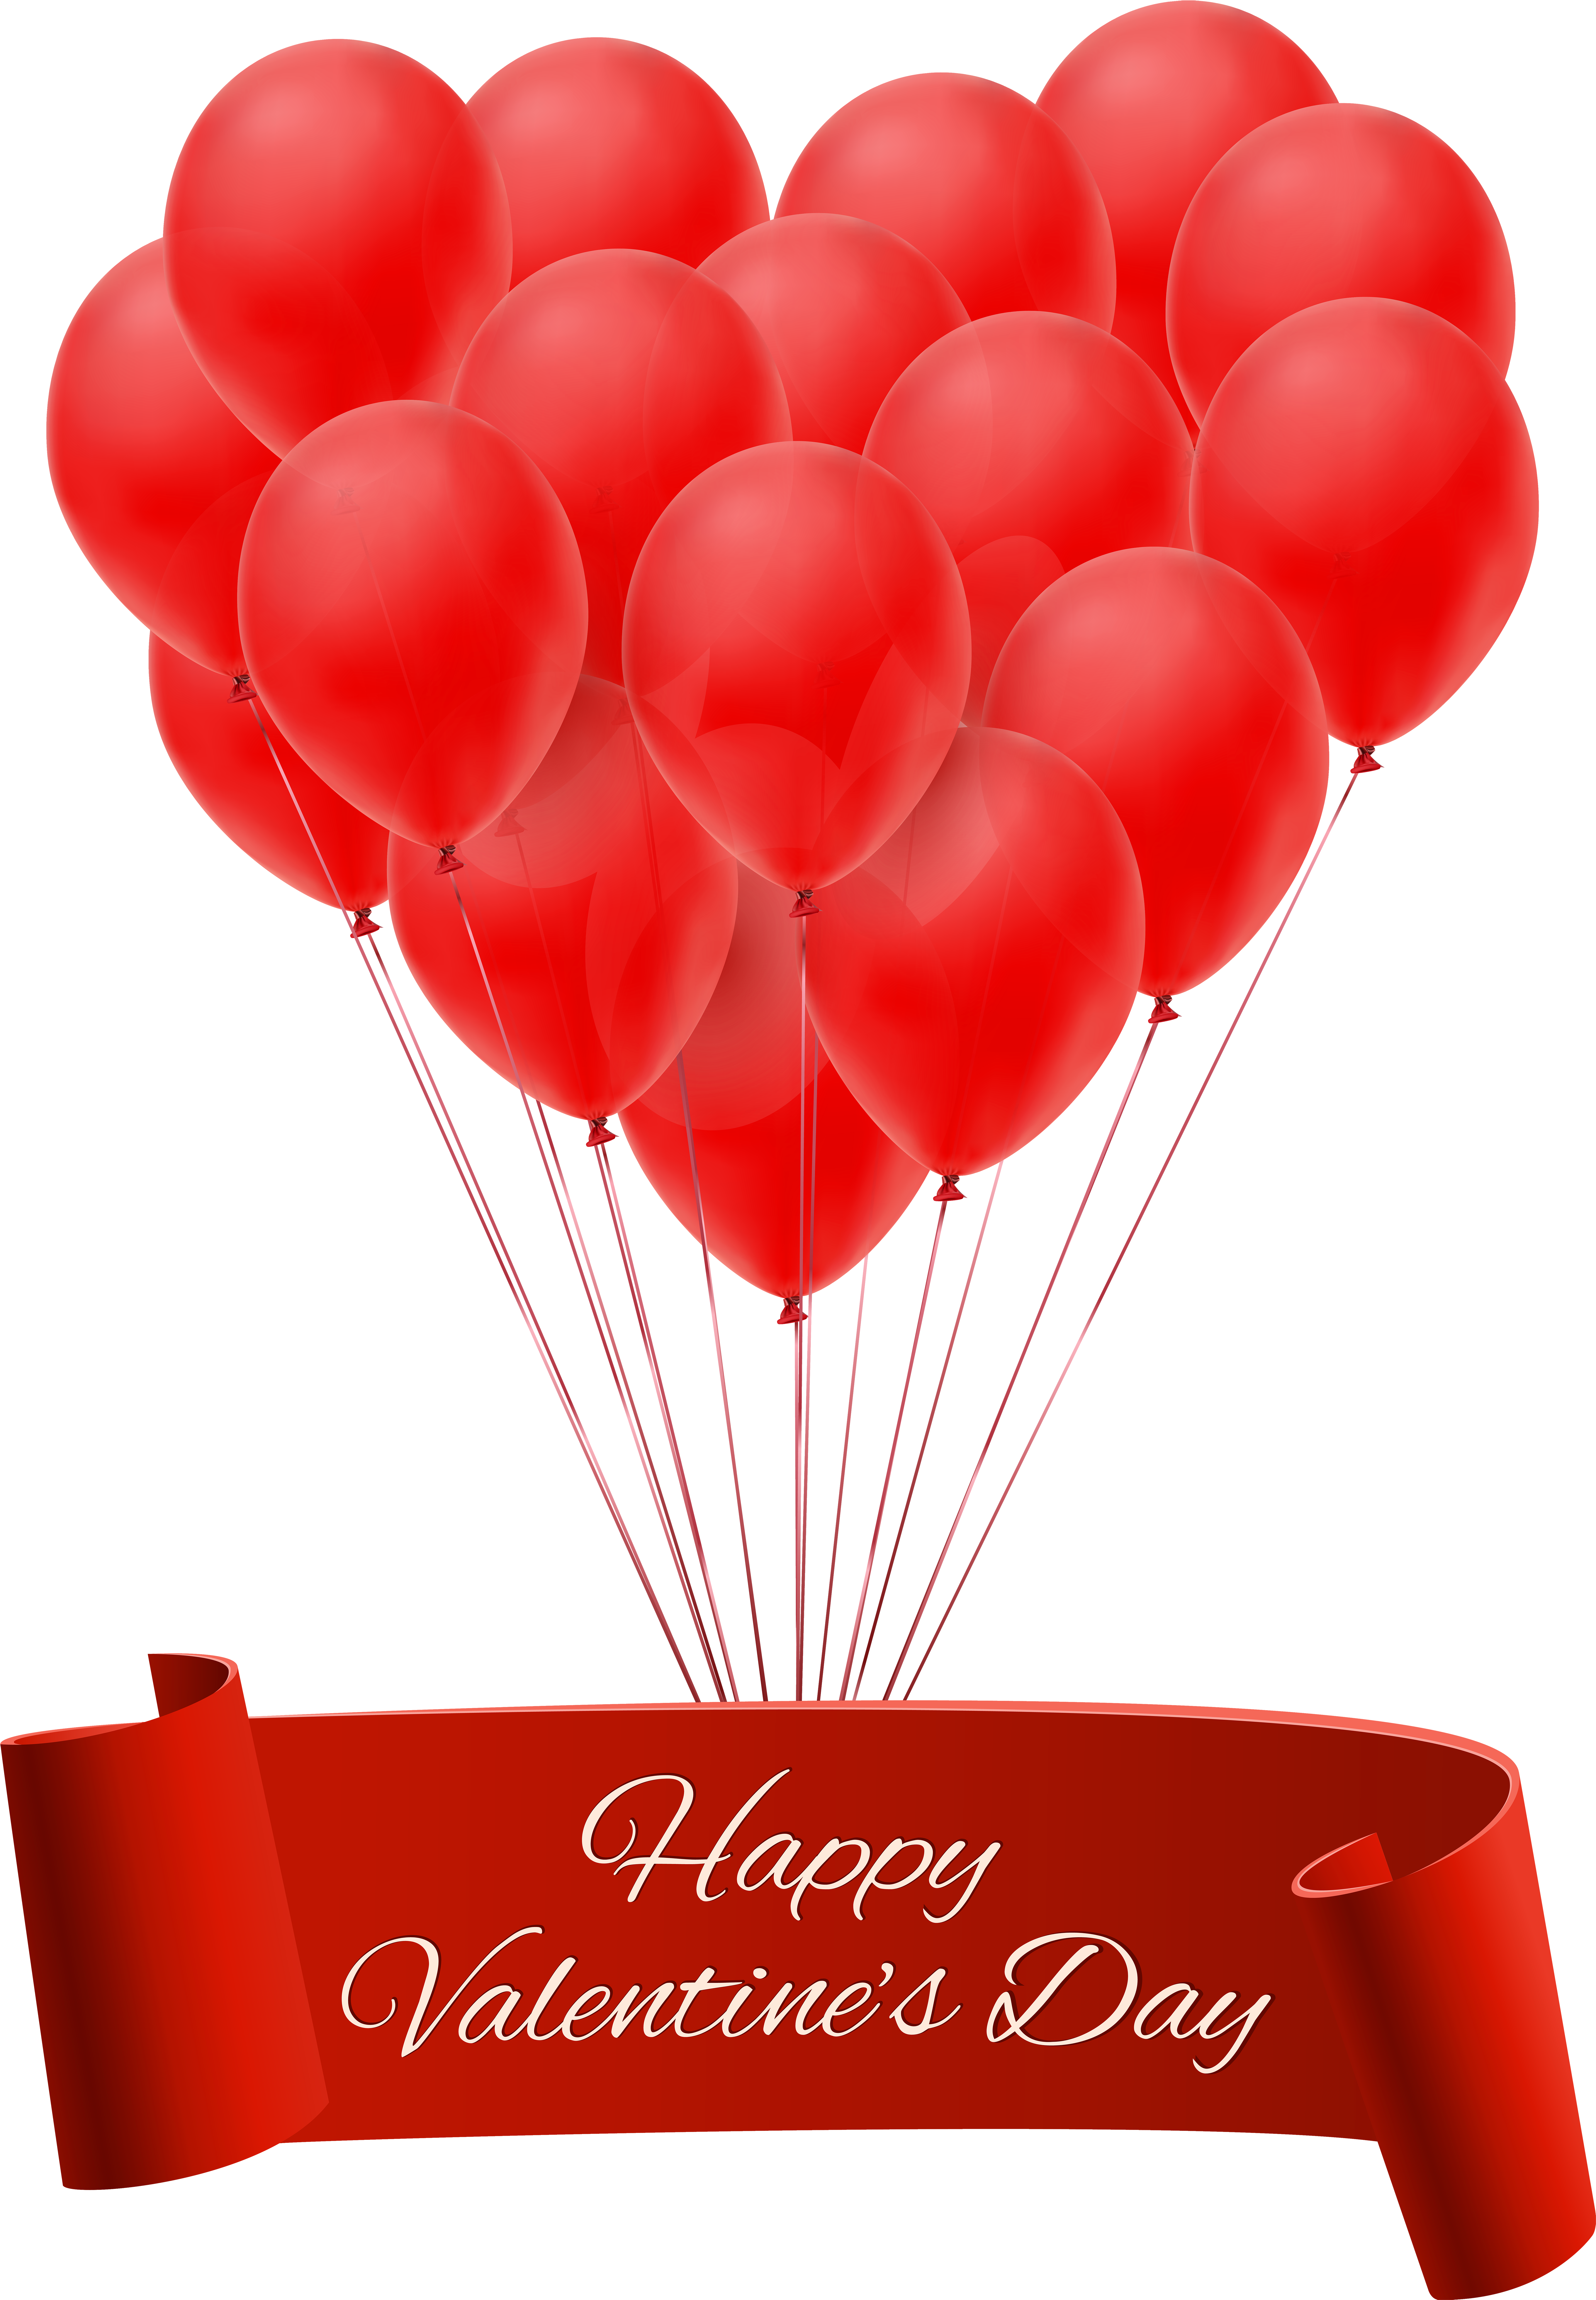 Banners For St - Happy Valentines Day Balloons (5553x8000)